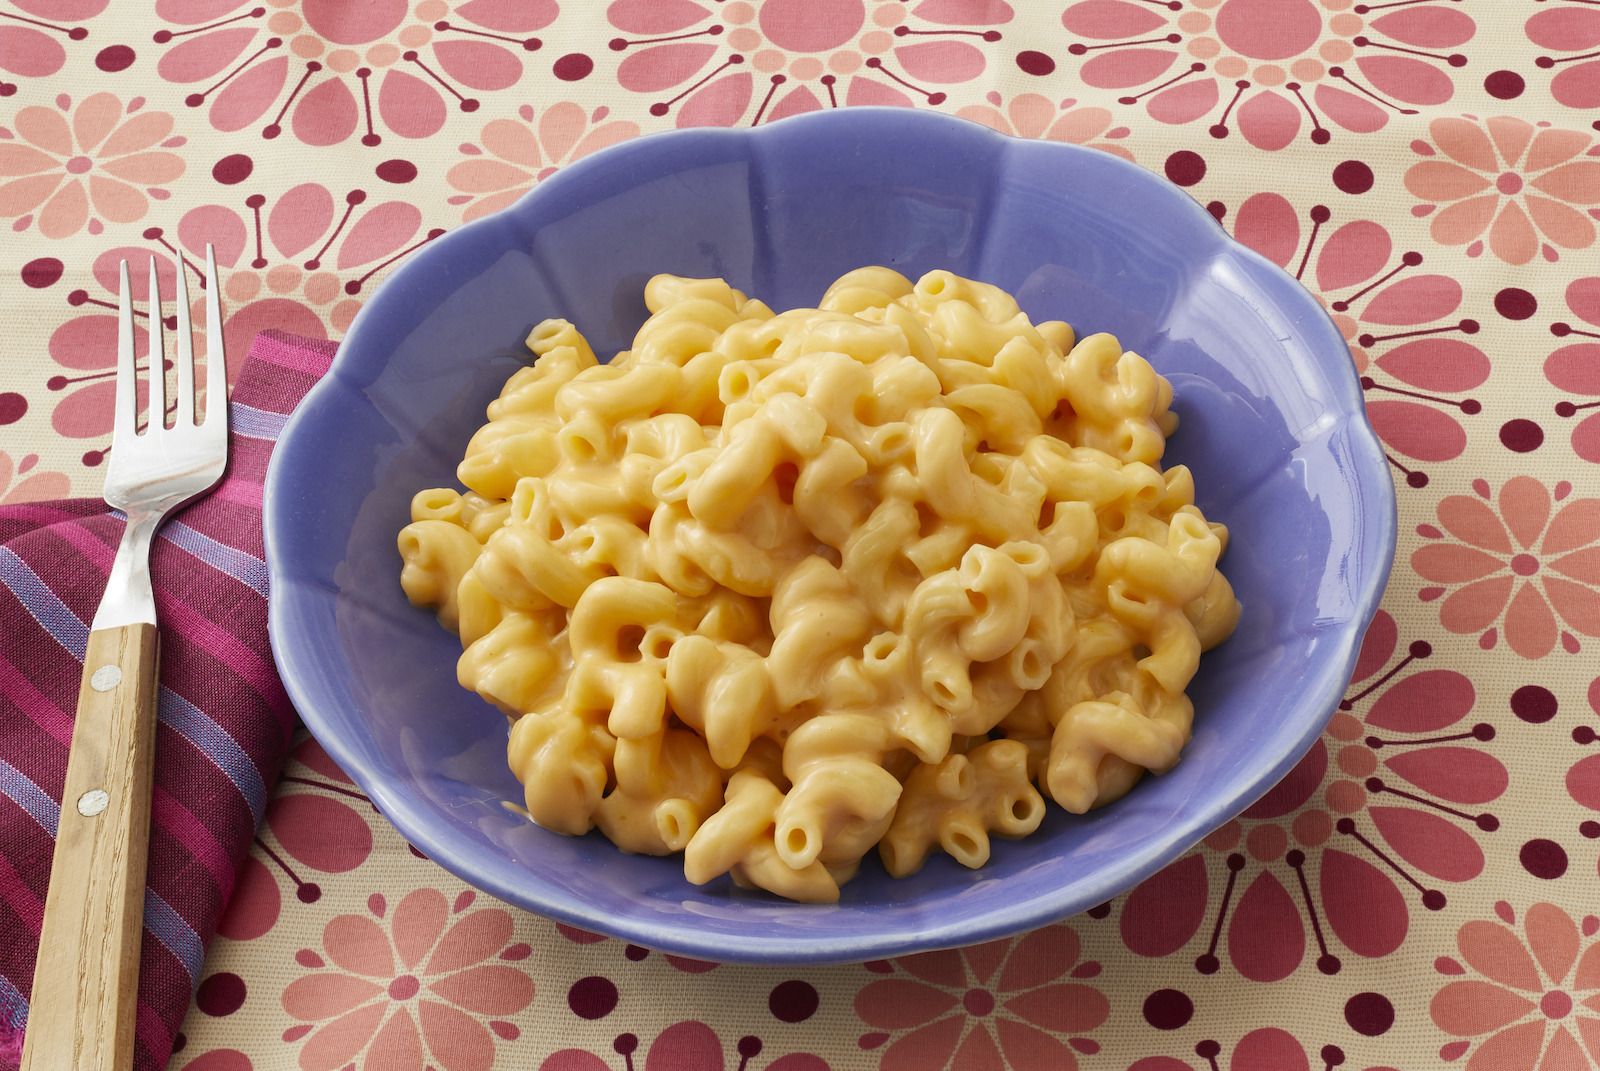 https://hips.hearstapps.com/hmg-prod/images/instant-pot-mac-and-cheese-1653591467.jpg